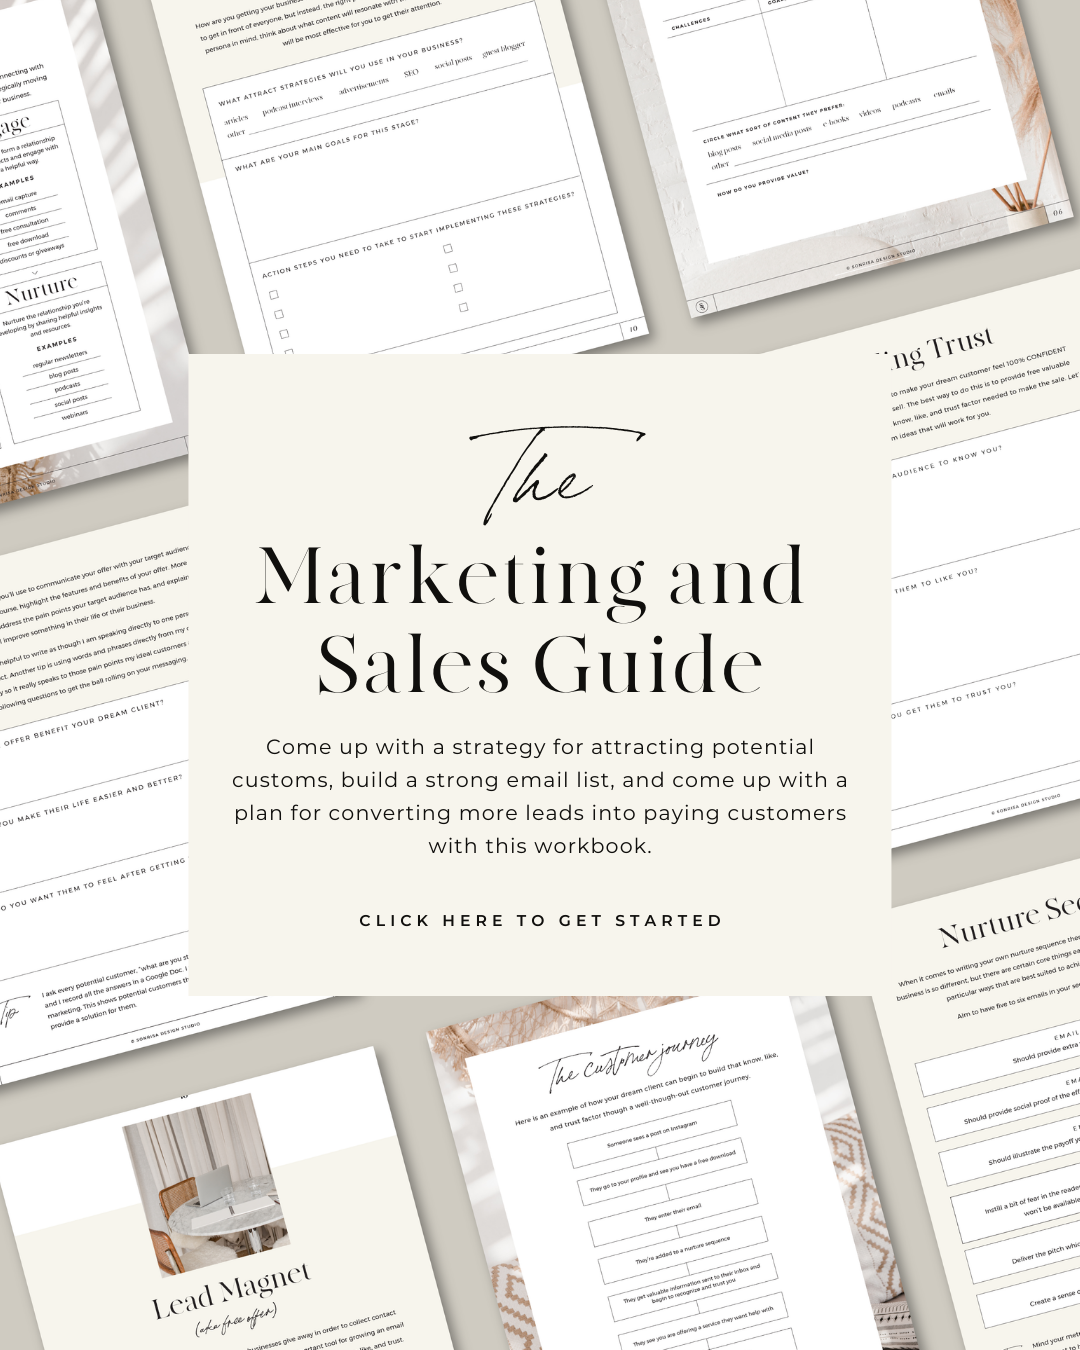 Marketing and Sales Guide from Sonrisa Studio